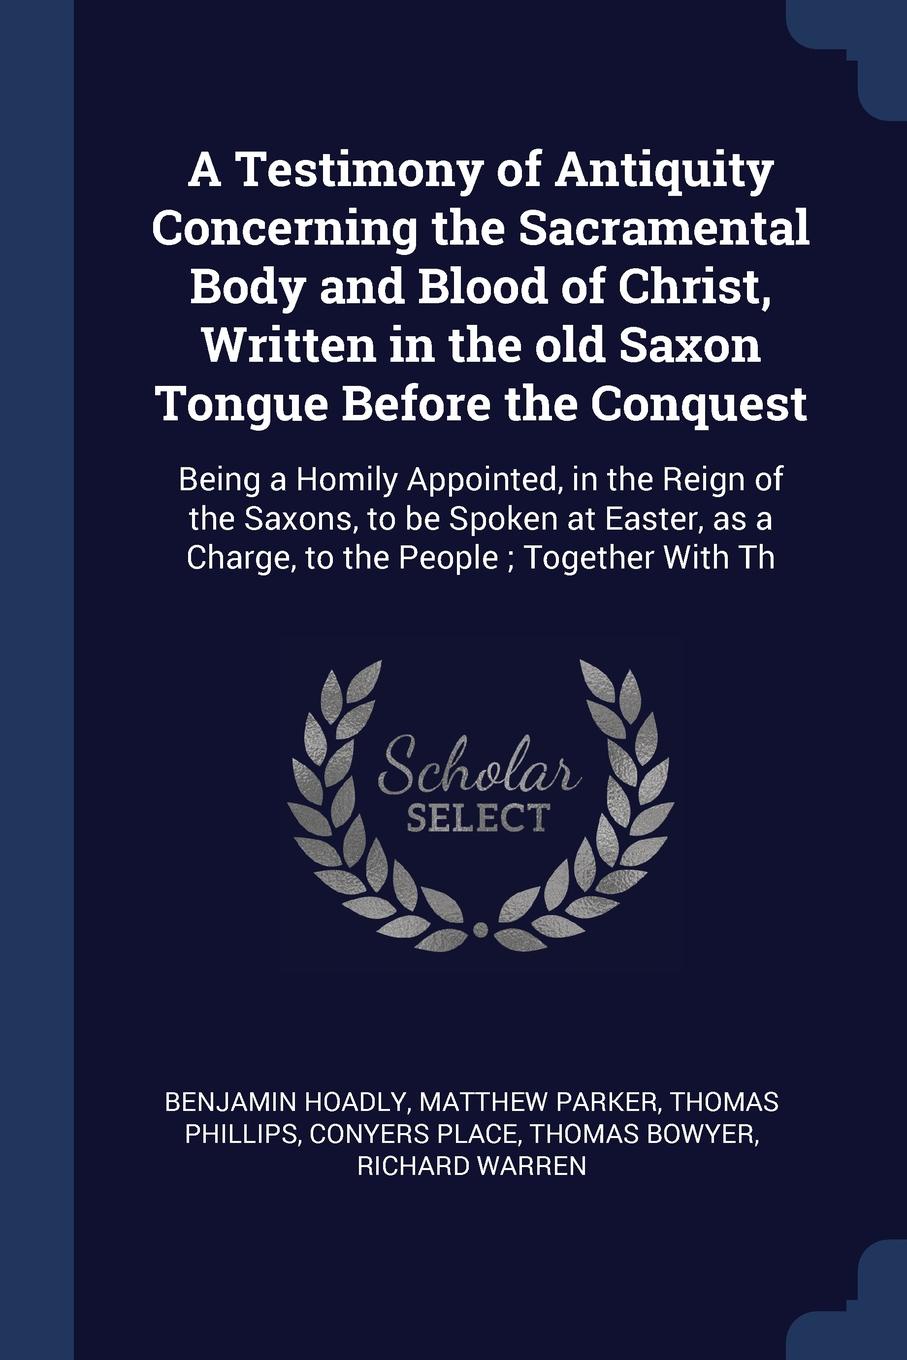 A Testimony of Antiquity Concerning the Sacramental Body and Blood of Christ, Written in the old Saxon Tongue Before the Conquest. Being a Homily Appointed, in the Reign of the Saxons, to be Spoken at Easter, as a Charge, to the People ; Together ...